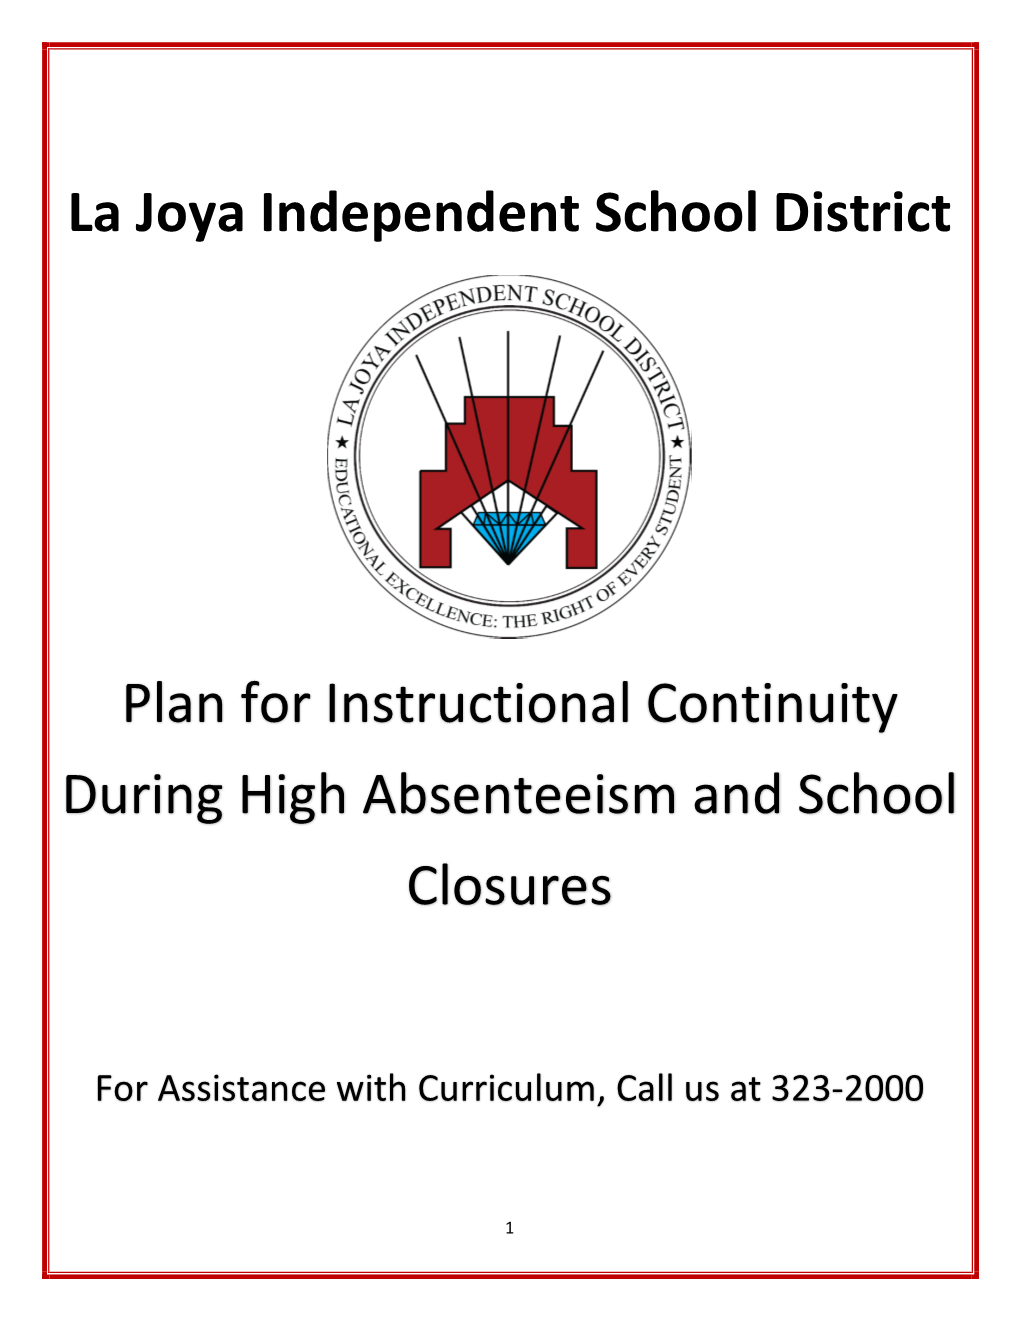 La Joya Independent School District Plan for Instructional Continuity During High Absenteeism and School Closures